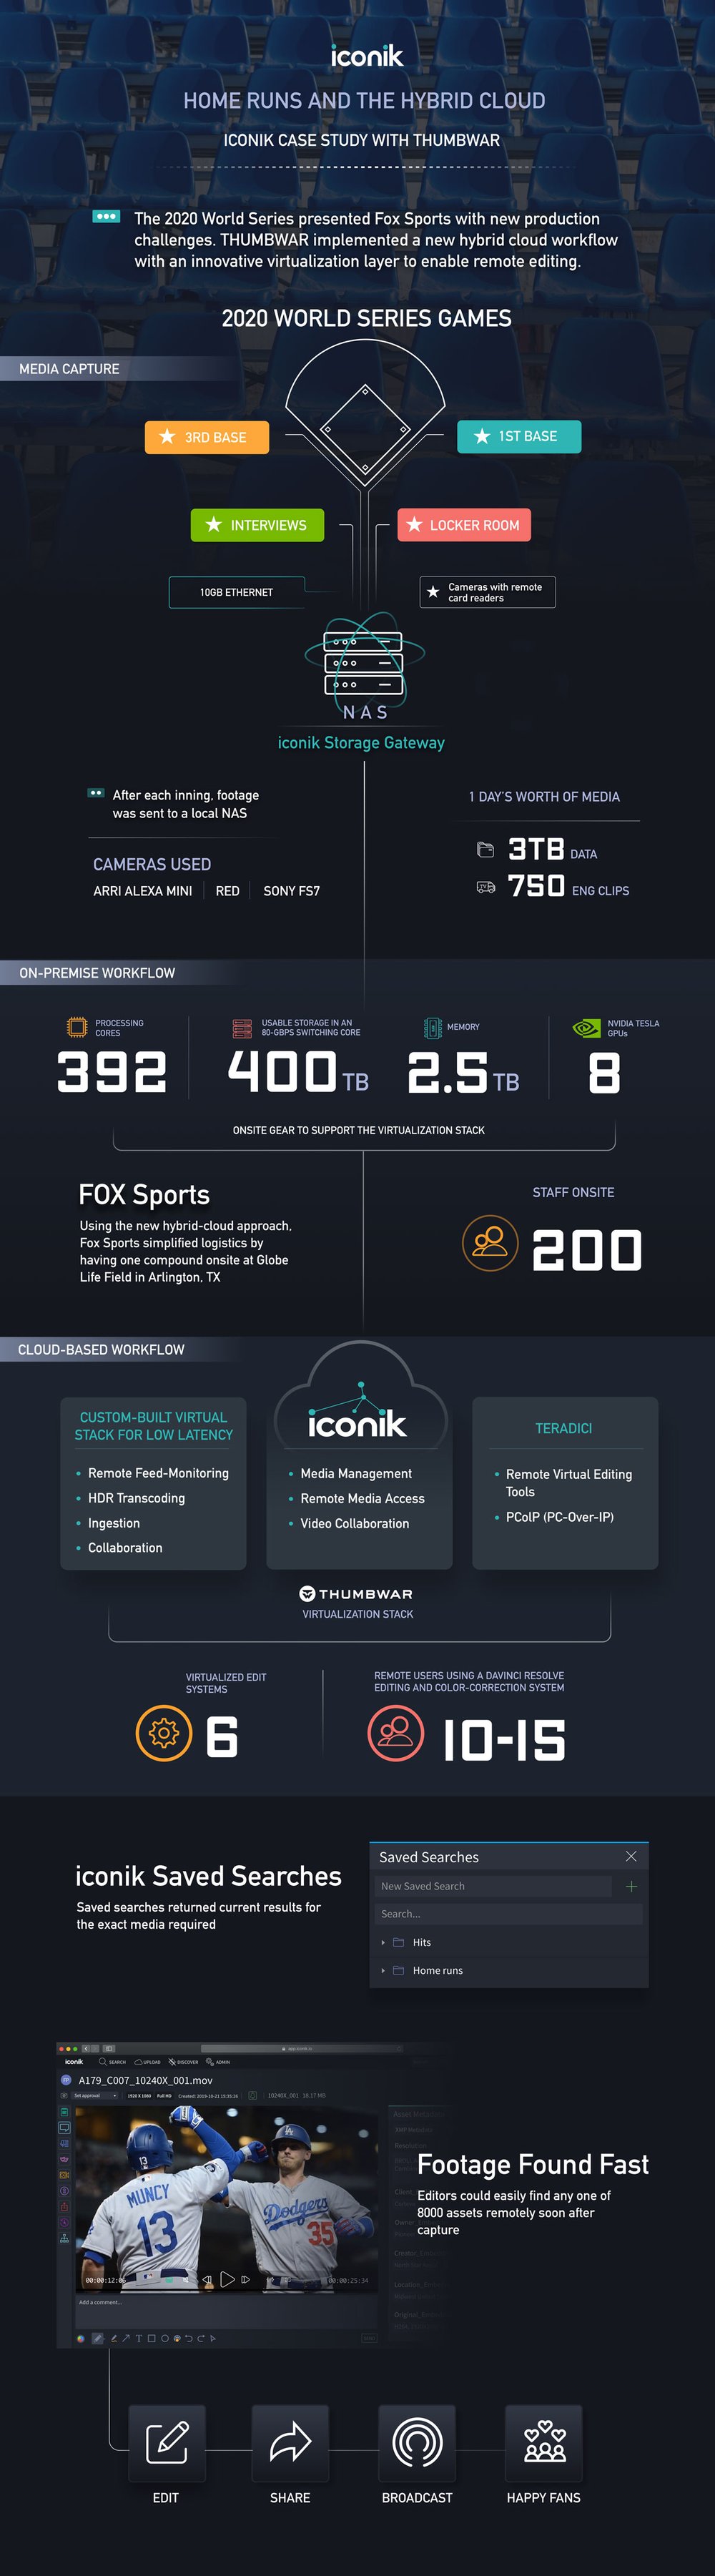 61237a53ccd7bd0148dcc375_thumbwar-iconik-2020-world-series-infographic